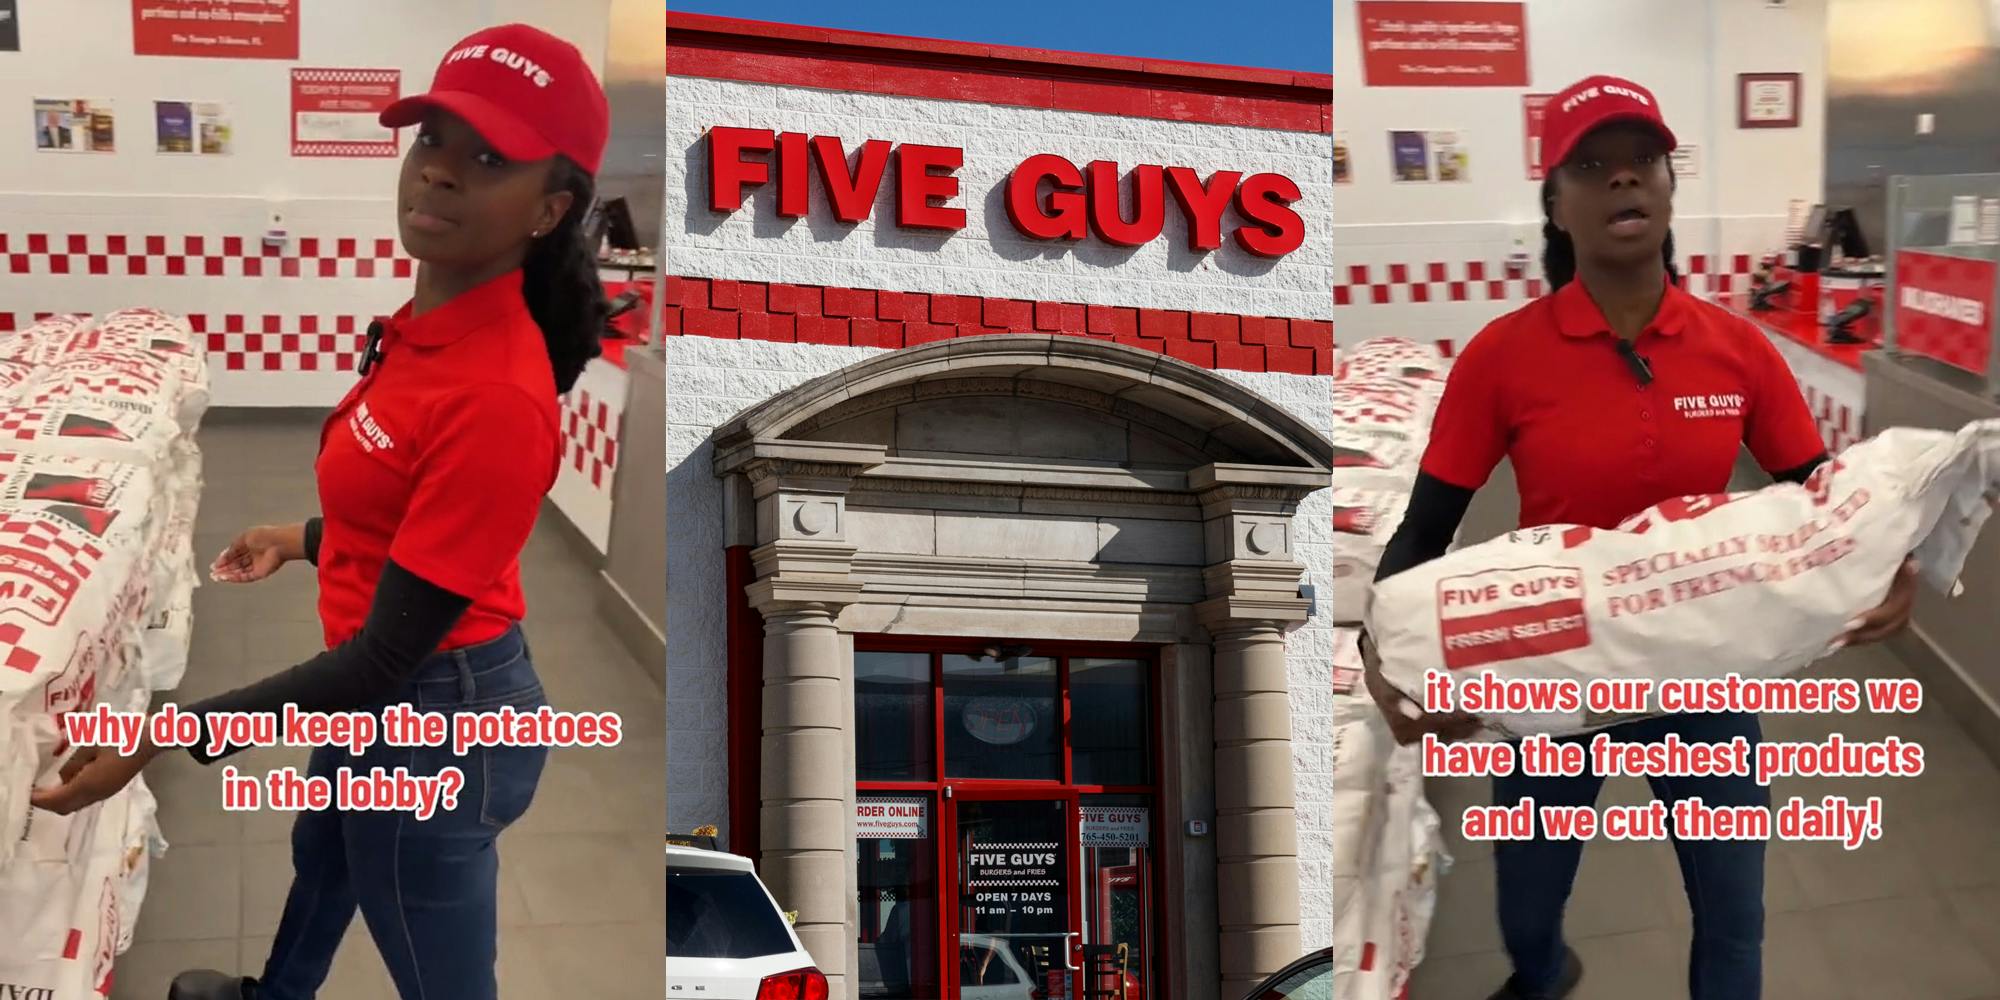 Five Guys employee reaching out for potatoes with caption "why do you keep the potatoes in the lobby?" (l) Five Guys building with sign (c) Five Guys employee carrying potatoes with caption "it shows our customers we have the freshest products and we cut them daily!" (r)